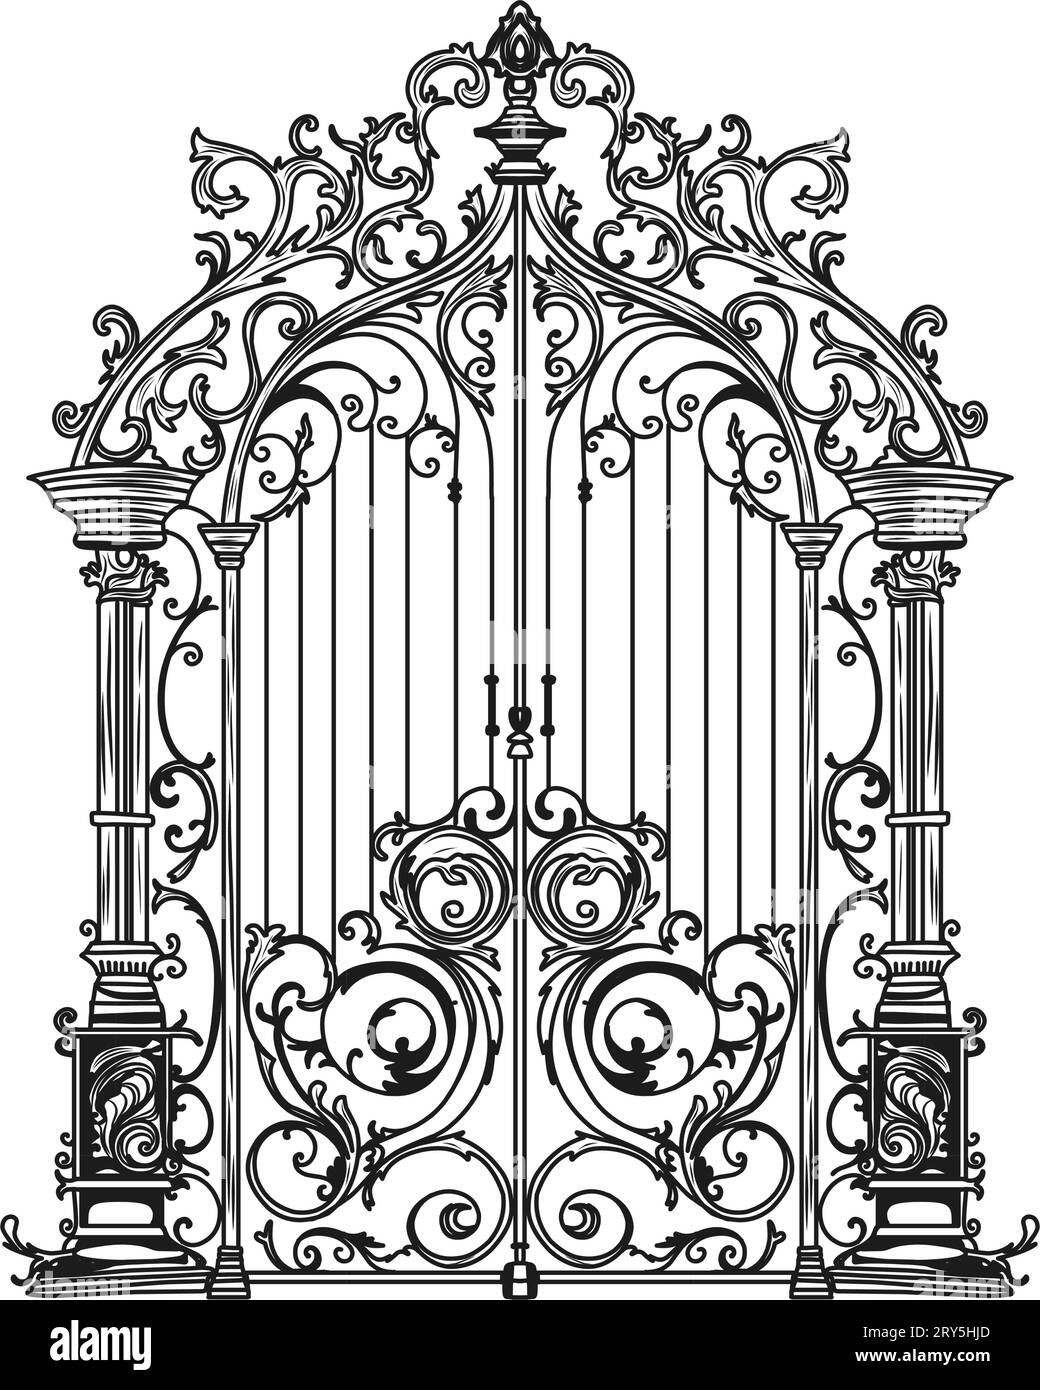 ANTIQUE METAL GATE. Black on white sketch of wrought iron bi-fold garden doors. Church gate with scrolls and leaves. Stock Vector